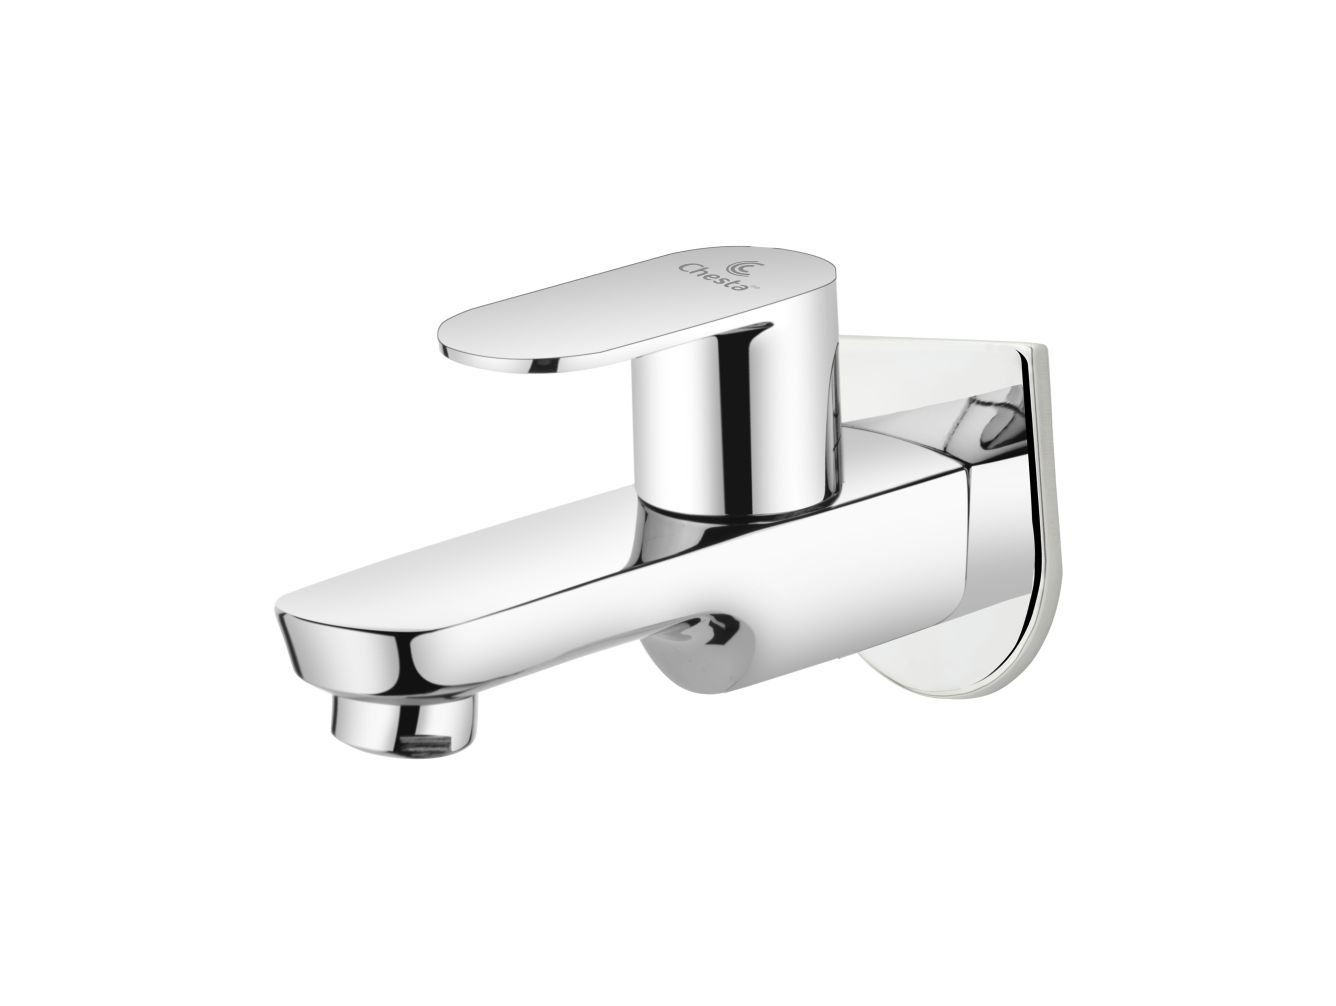 PD-1001 - Bib Cock with wall flange flange at Chesta Bath Fittings